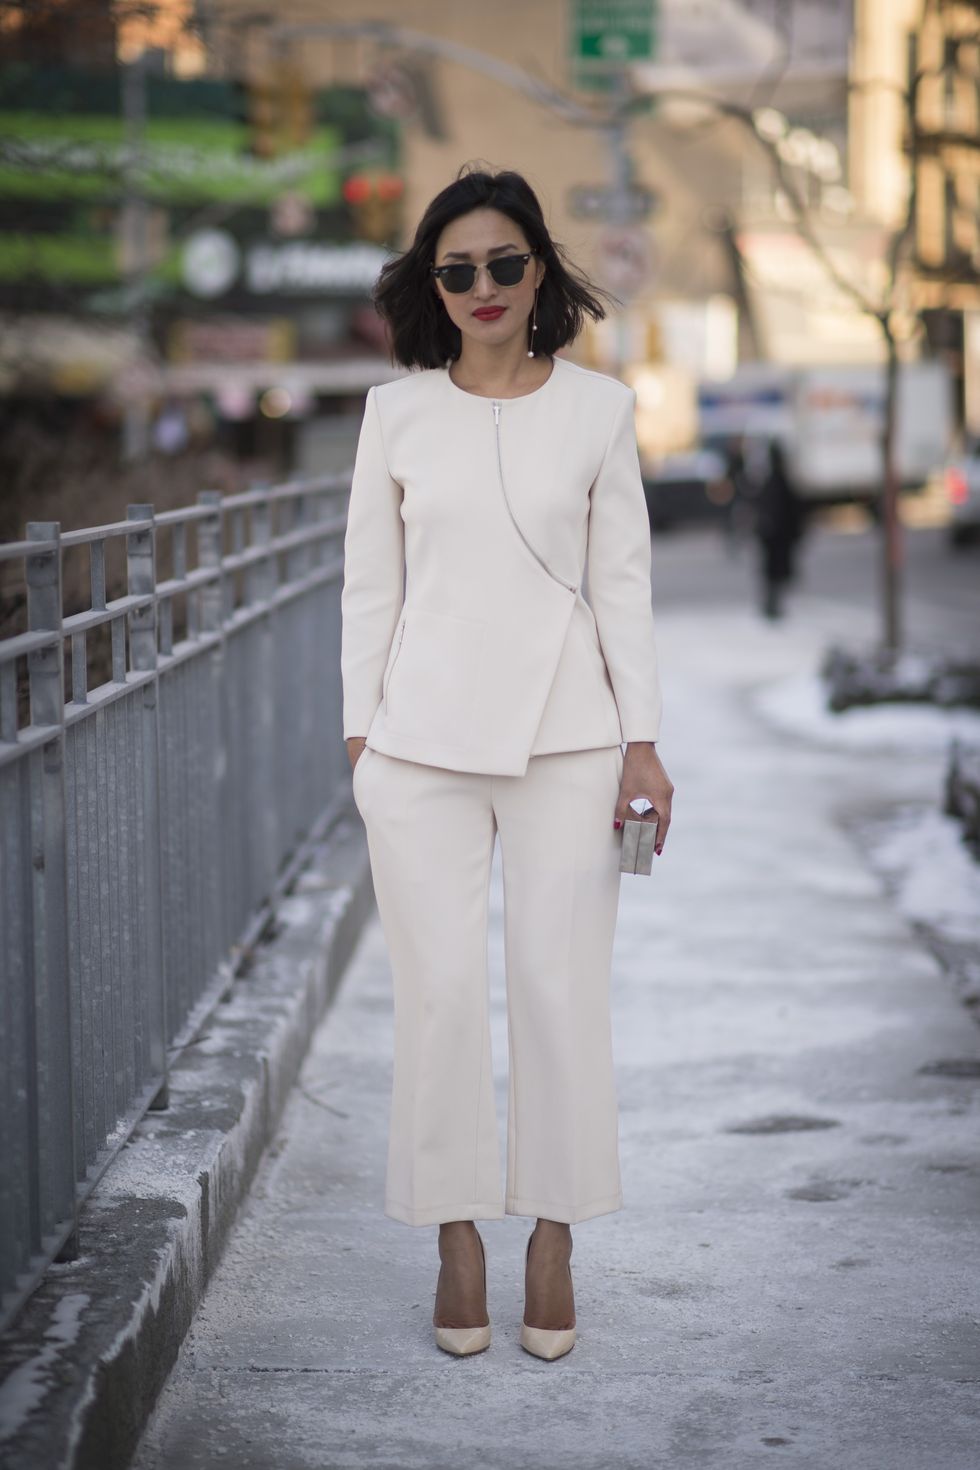 How to wear head-to-toe white if you're petite